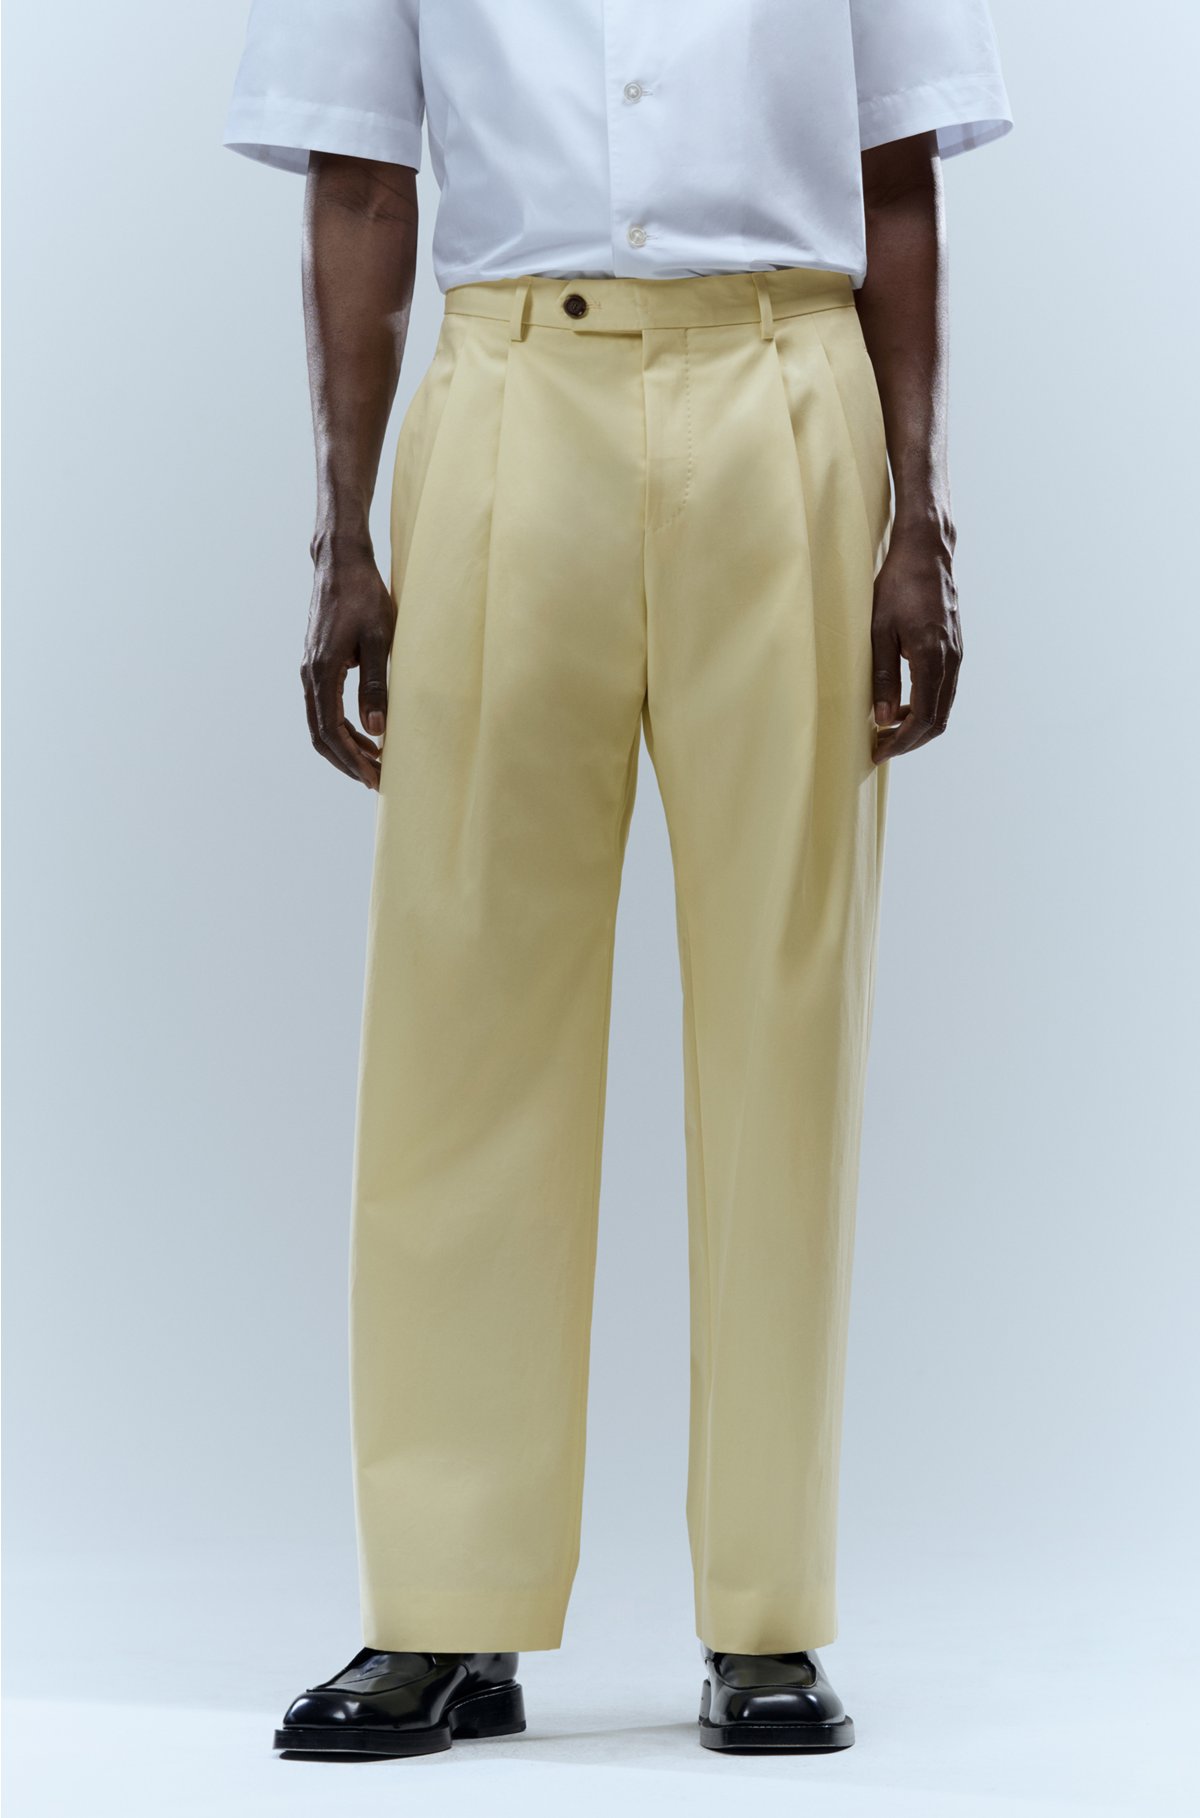 Classic Two Tone Relaxed Fit Baggy Pants With Blade Star Gold Design